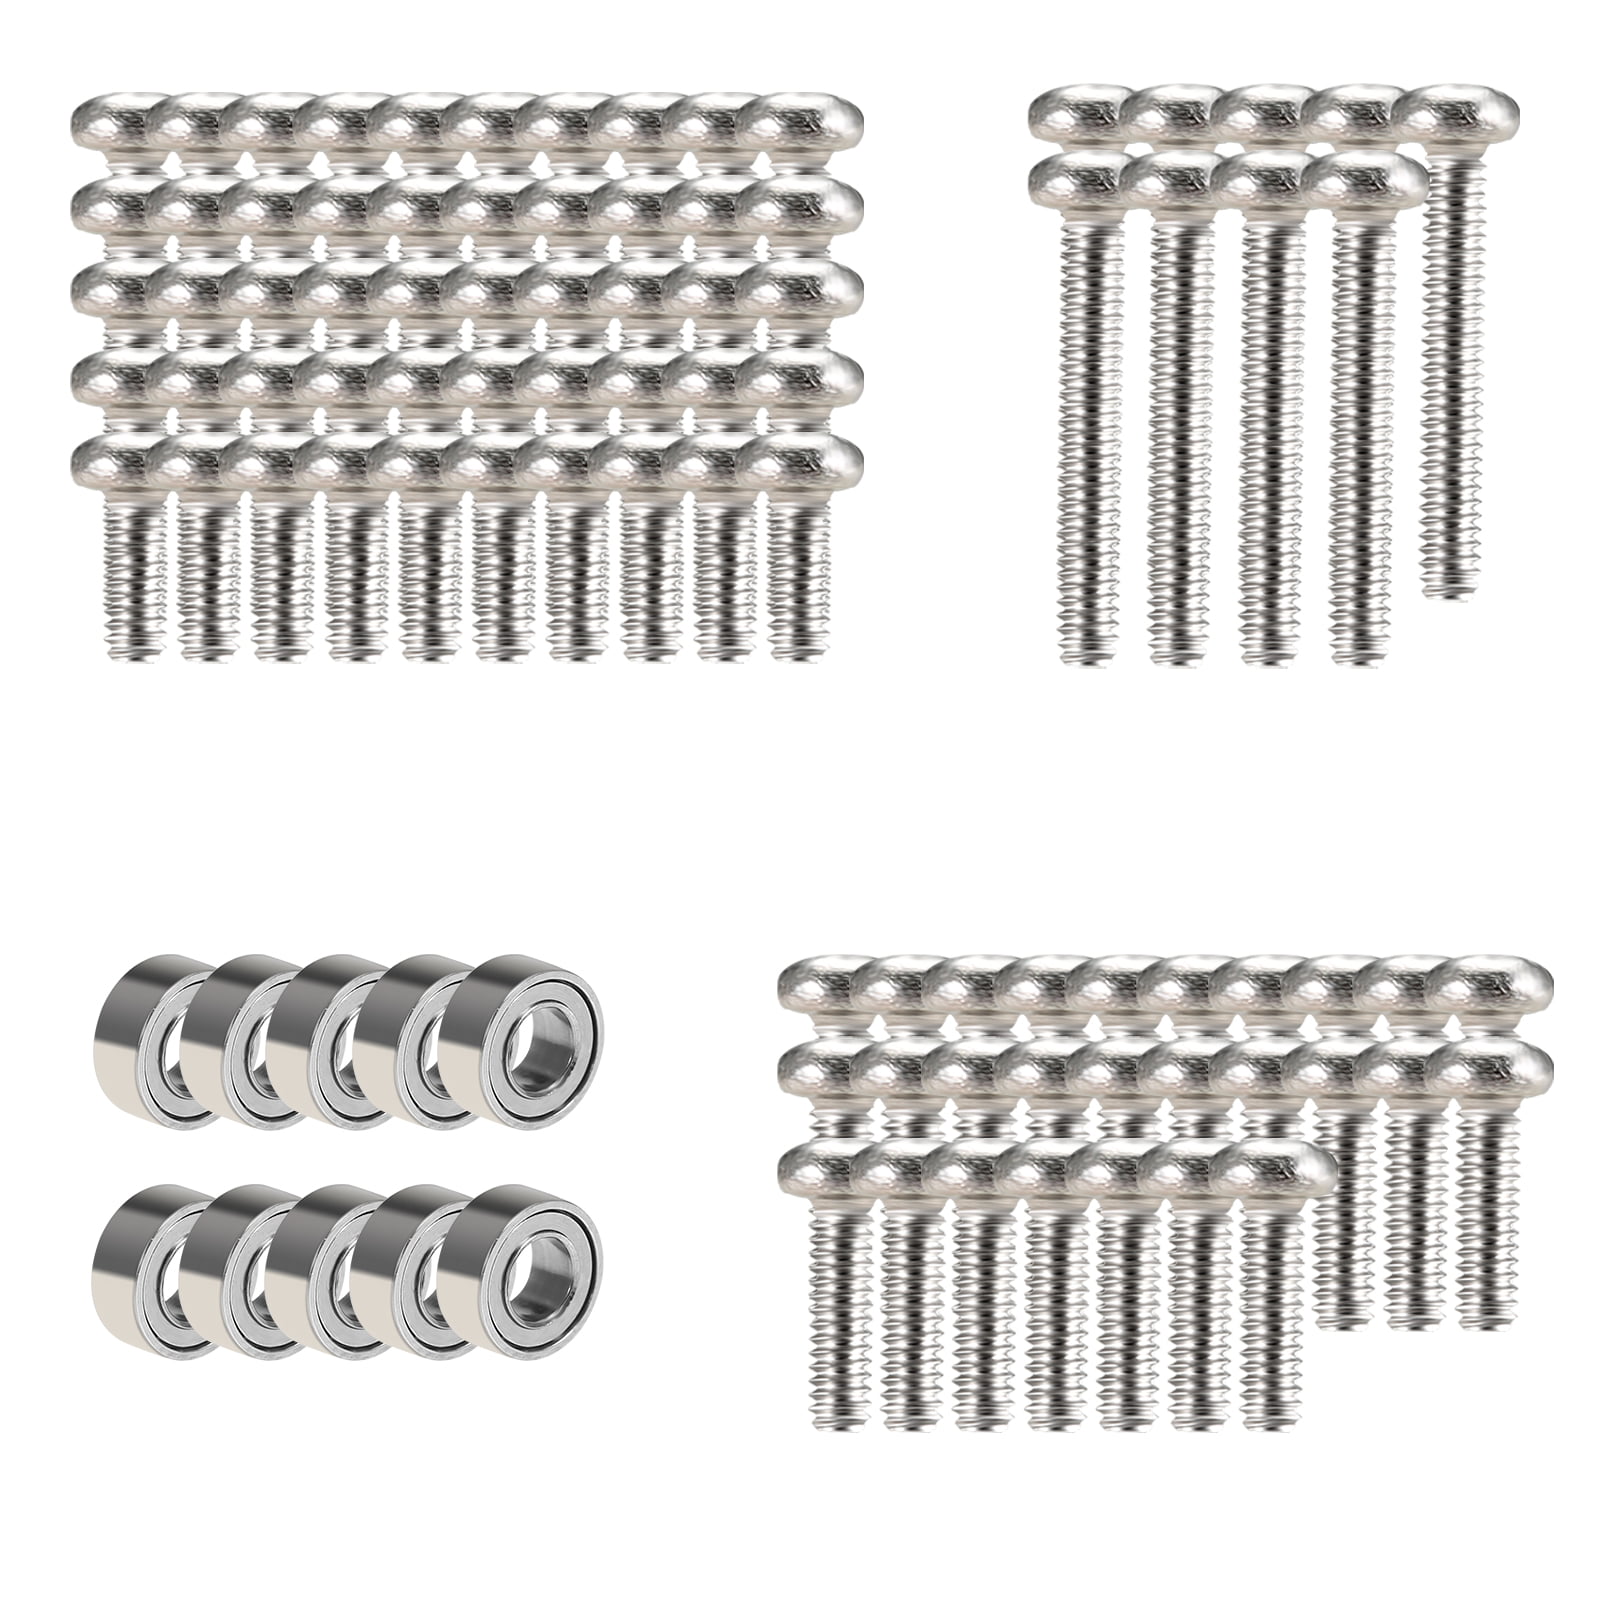 Rc Parts 1:24 Ball Head Screw for Rc Vehicle